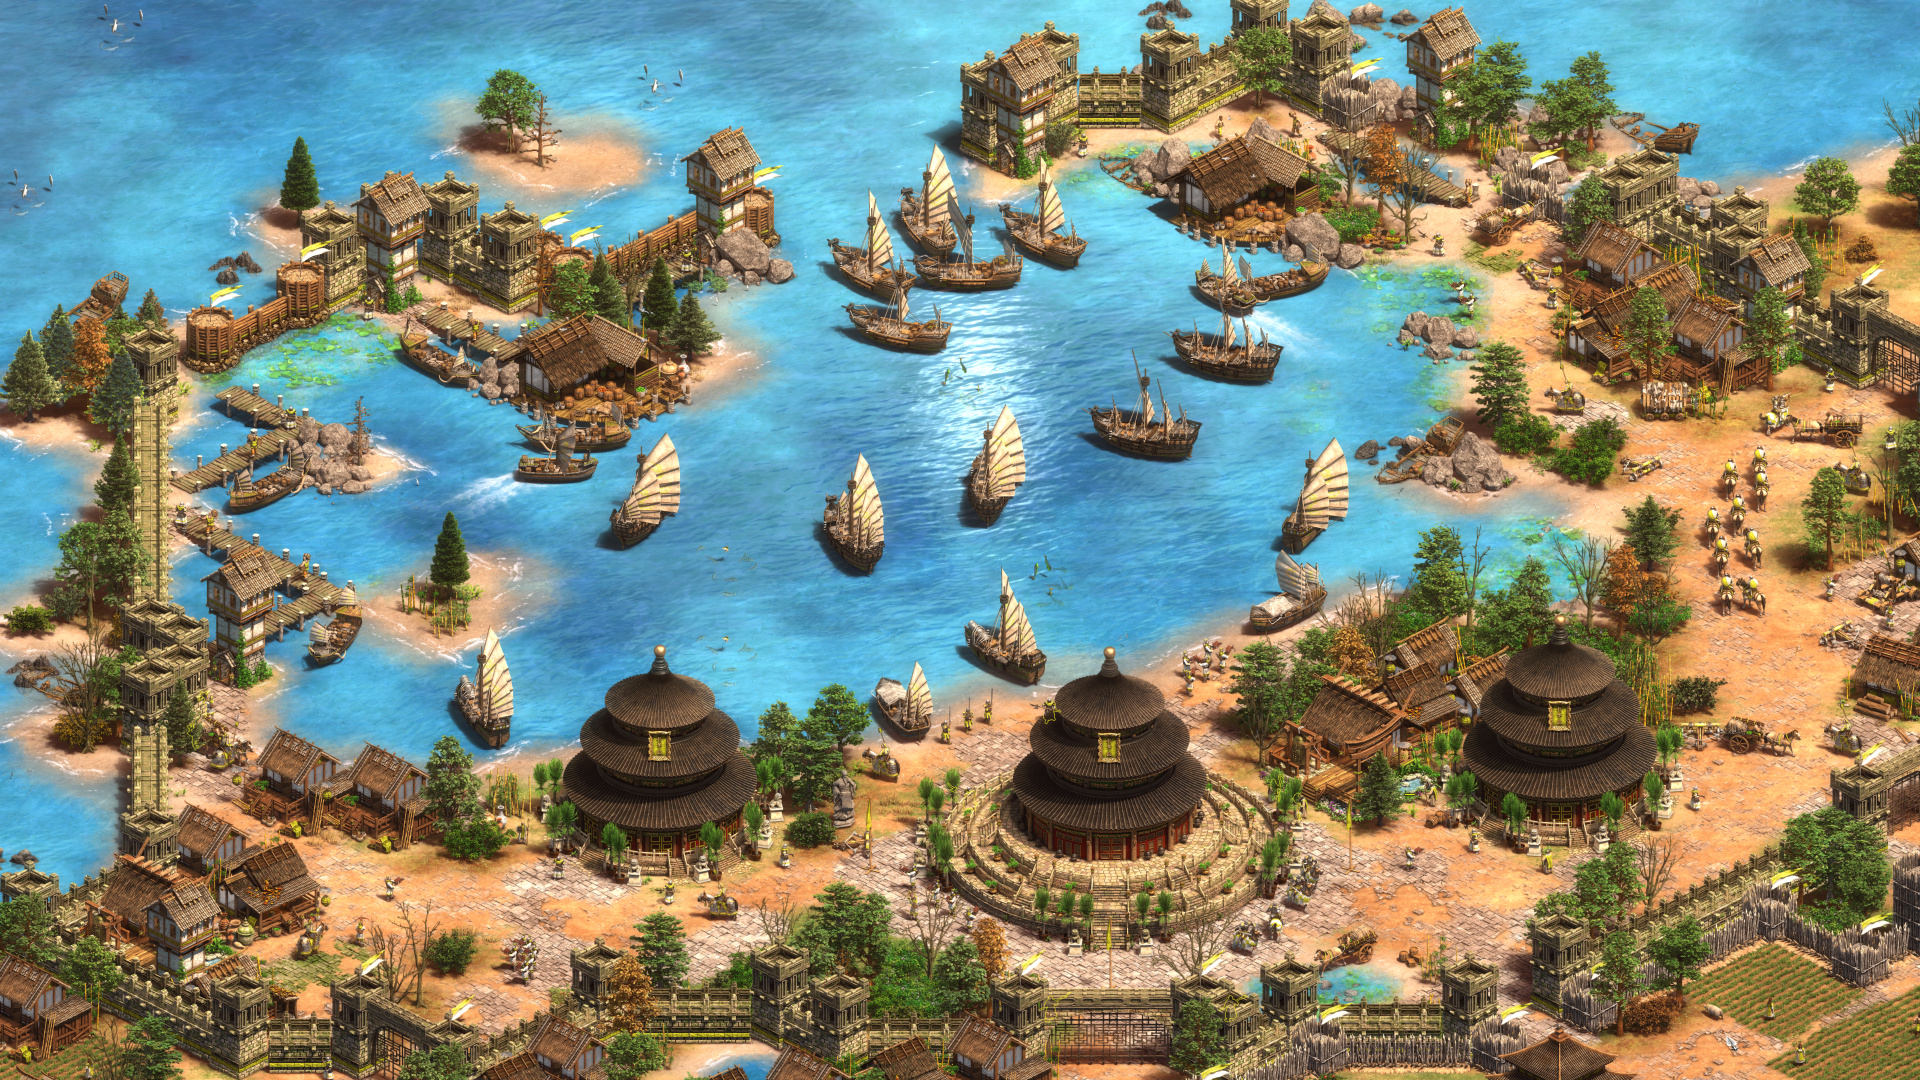 Age of Empires II – Definitive Edition